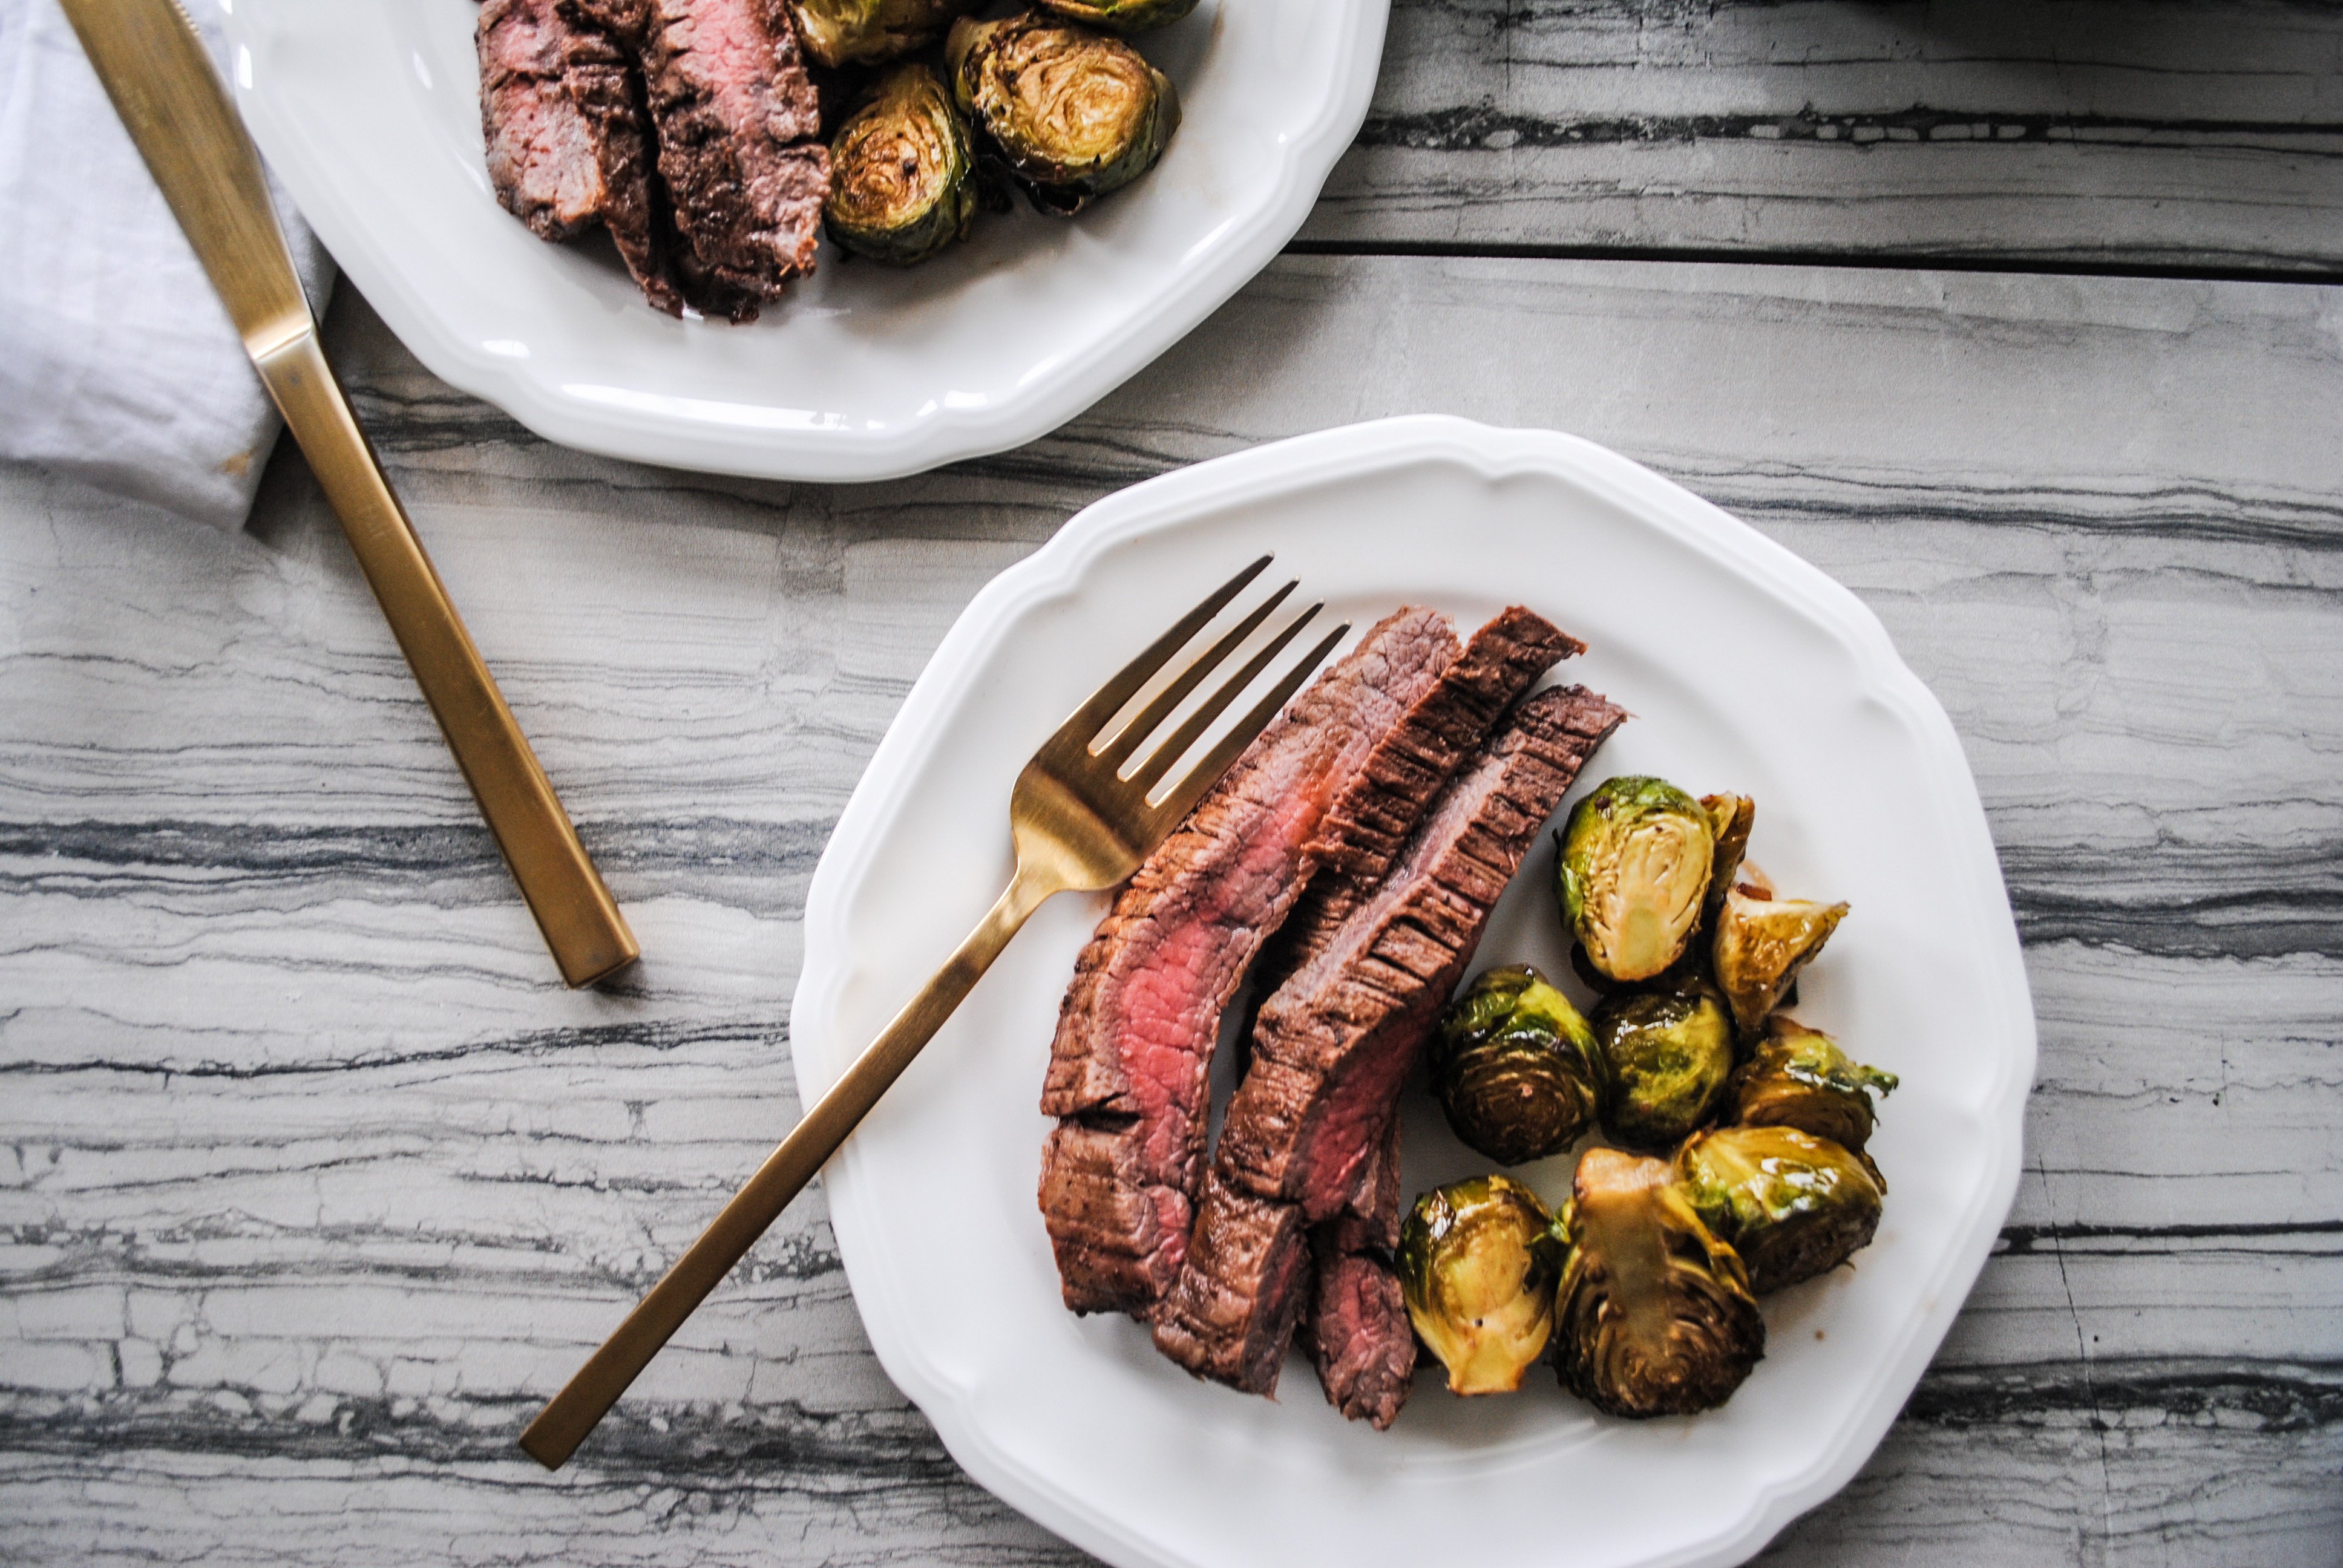 Food Blogger Jenny Meassick of Chocolate and Lace shares her recipe for Flank Steaks and Honey Balsamic Brussel Sprouts